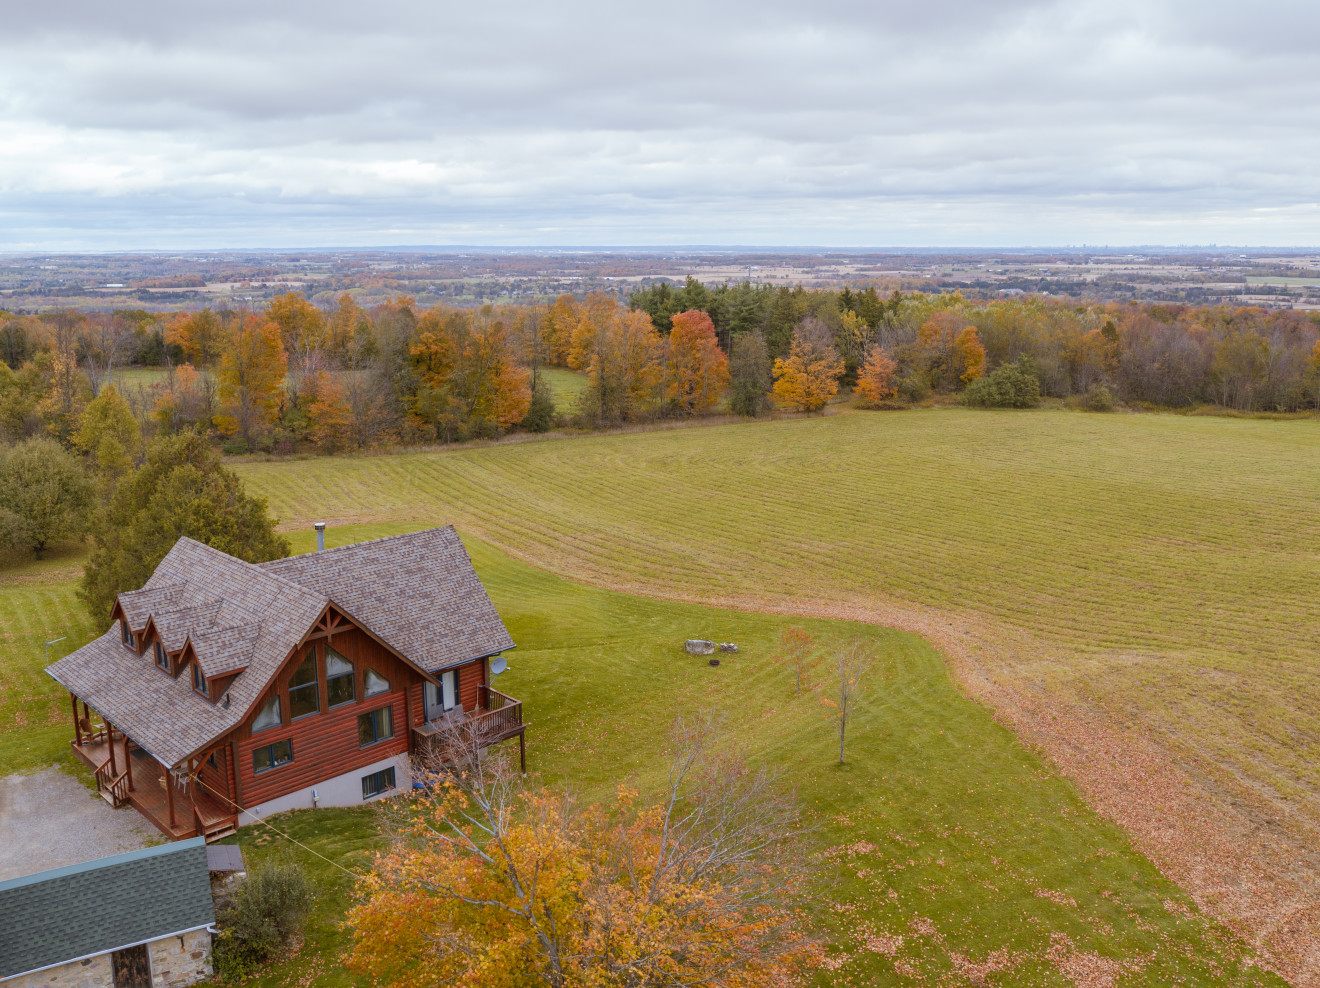 An image of the pastoral Hart House Farm, from above.